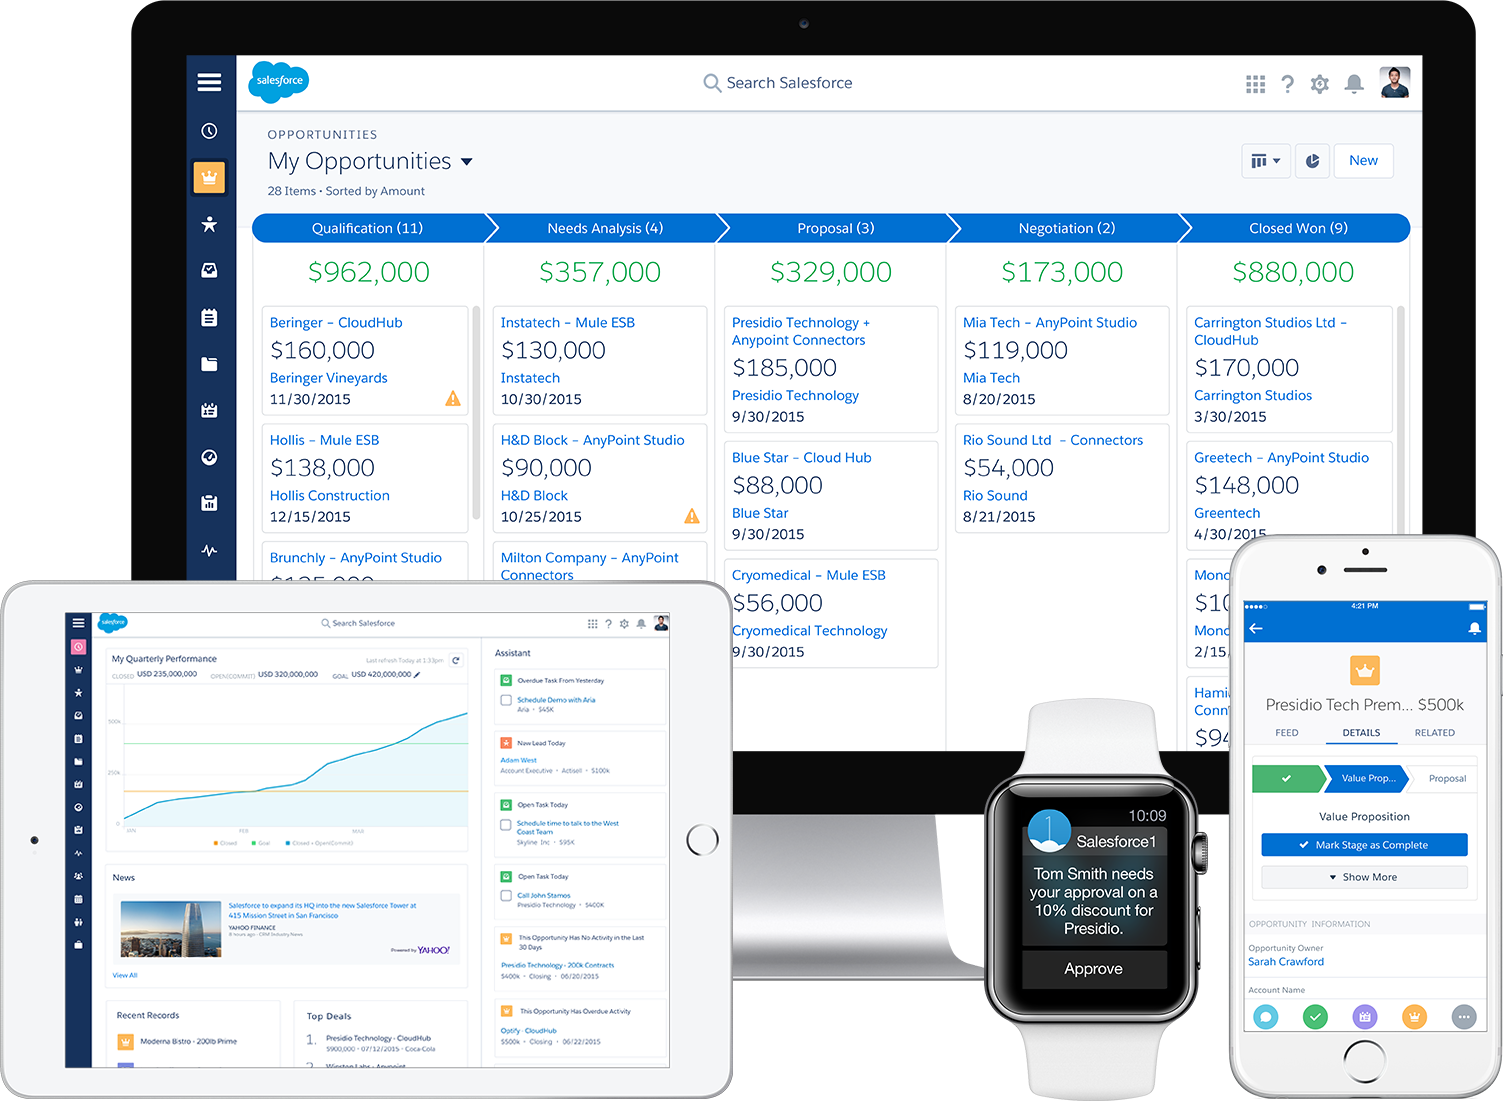 Salesforce Lightning Experience unveiled – I like it! I know I’m going to love using it!